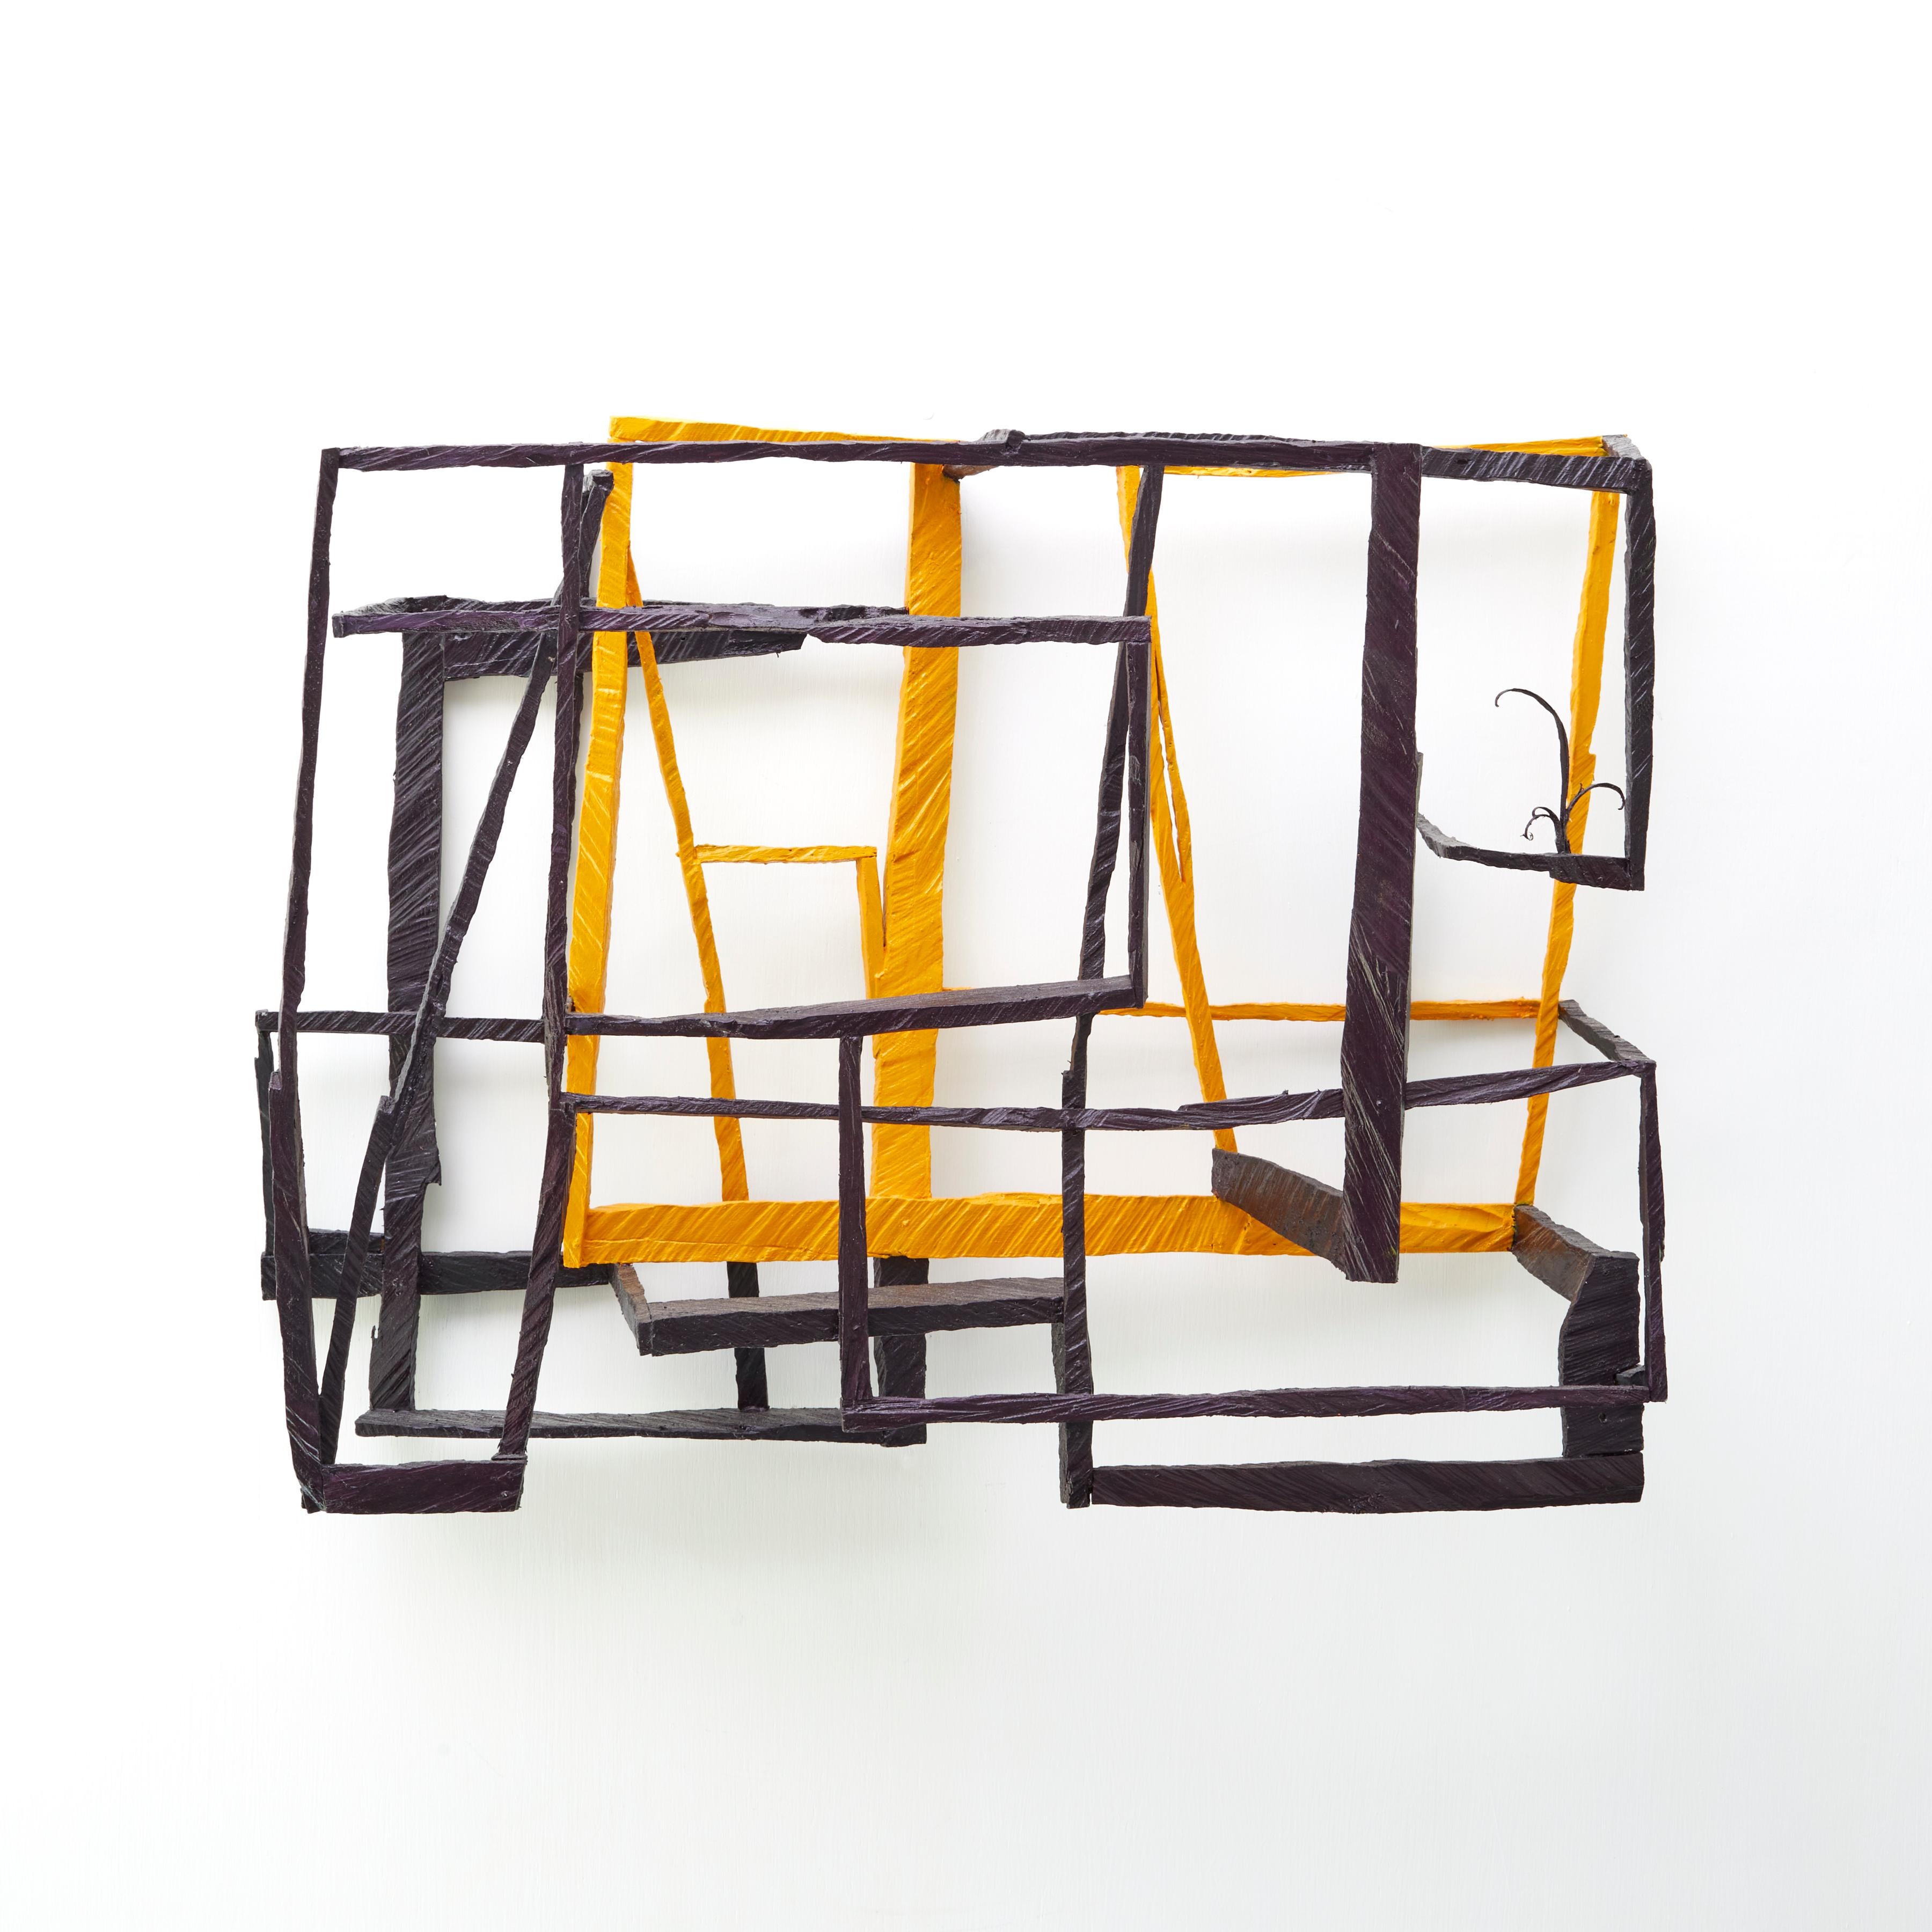 Joe Sultan Abstract Sculpture - Walking Sticks, yellow and black abstract geometric wooden sculpture